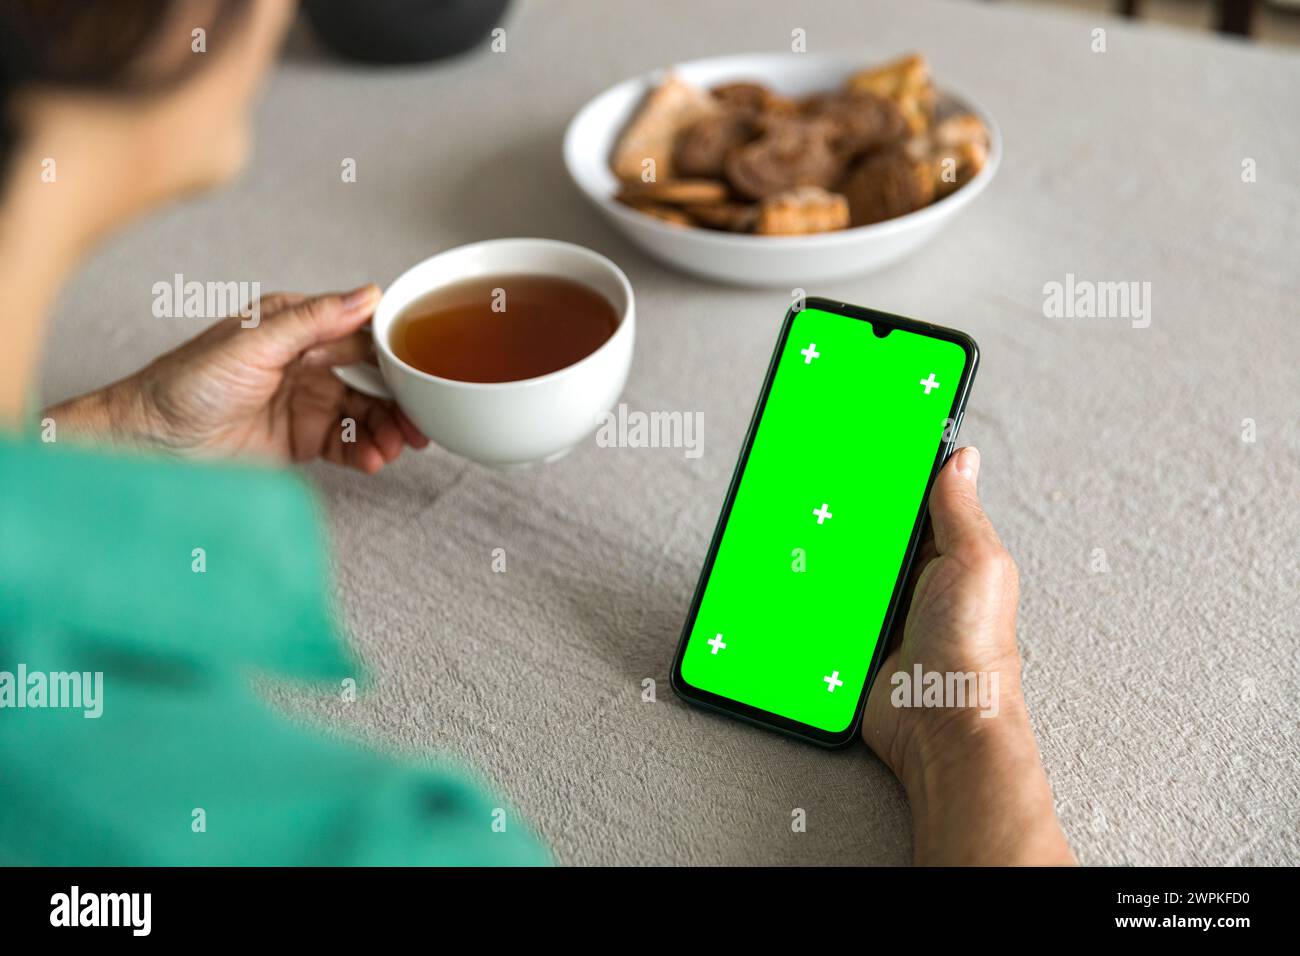 mobile phone with green screen chromakey display in elderly woman hand Stock Photo